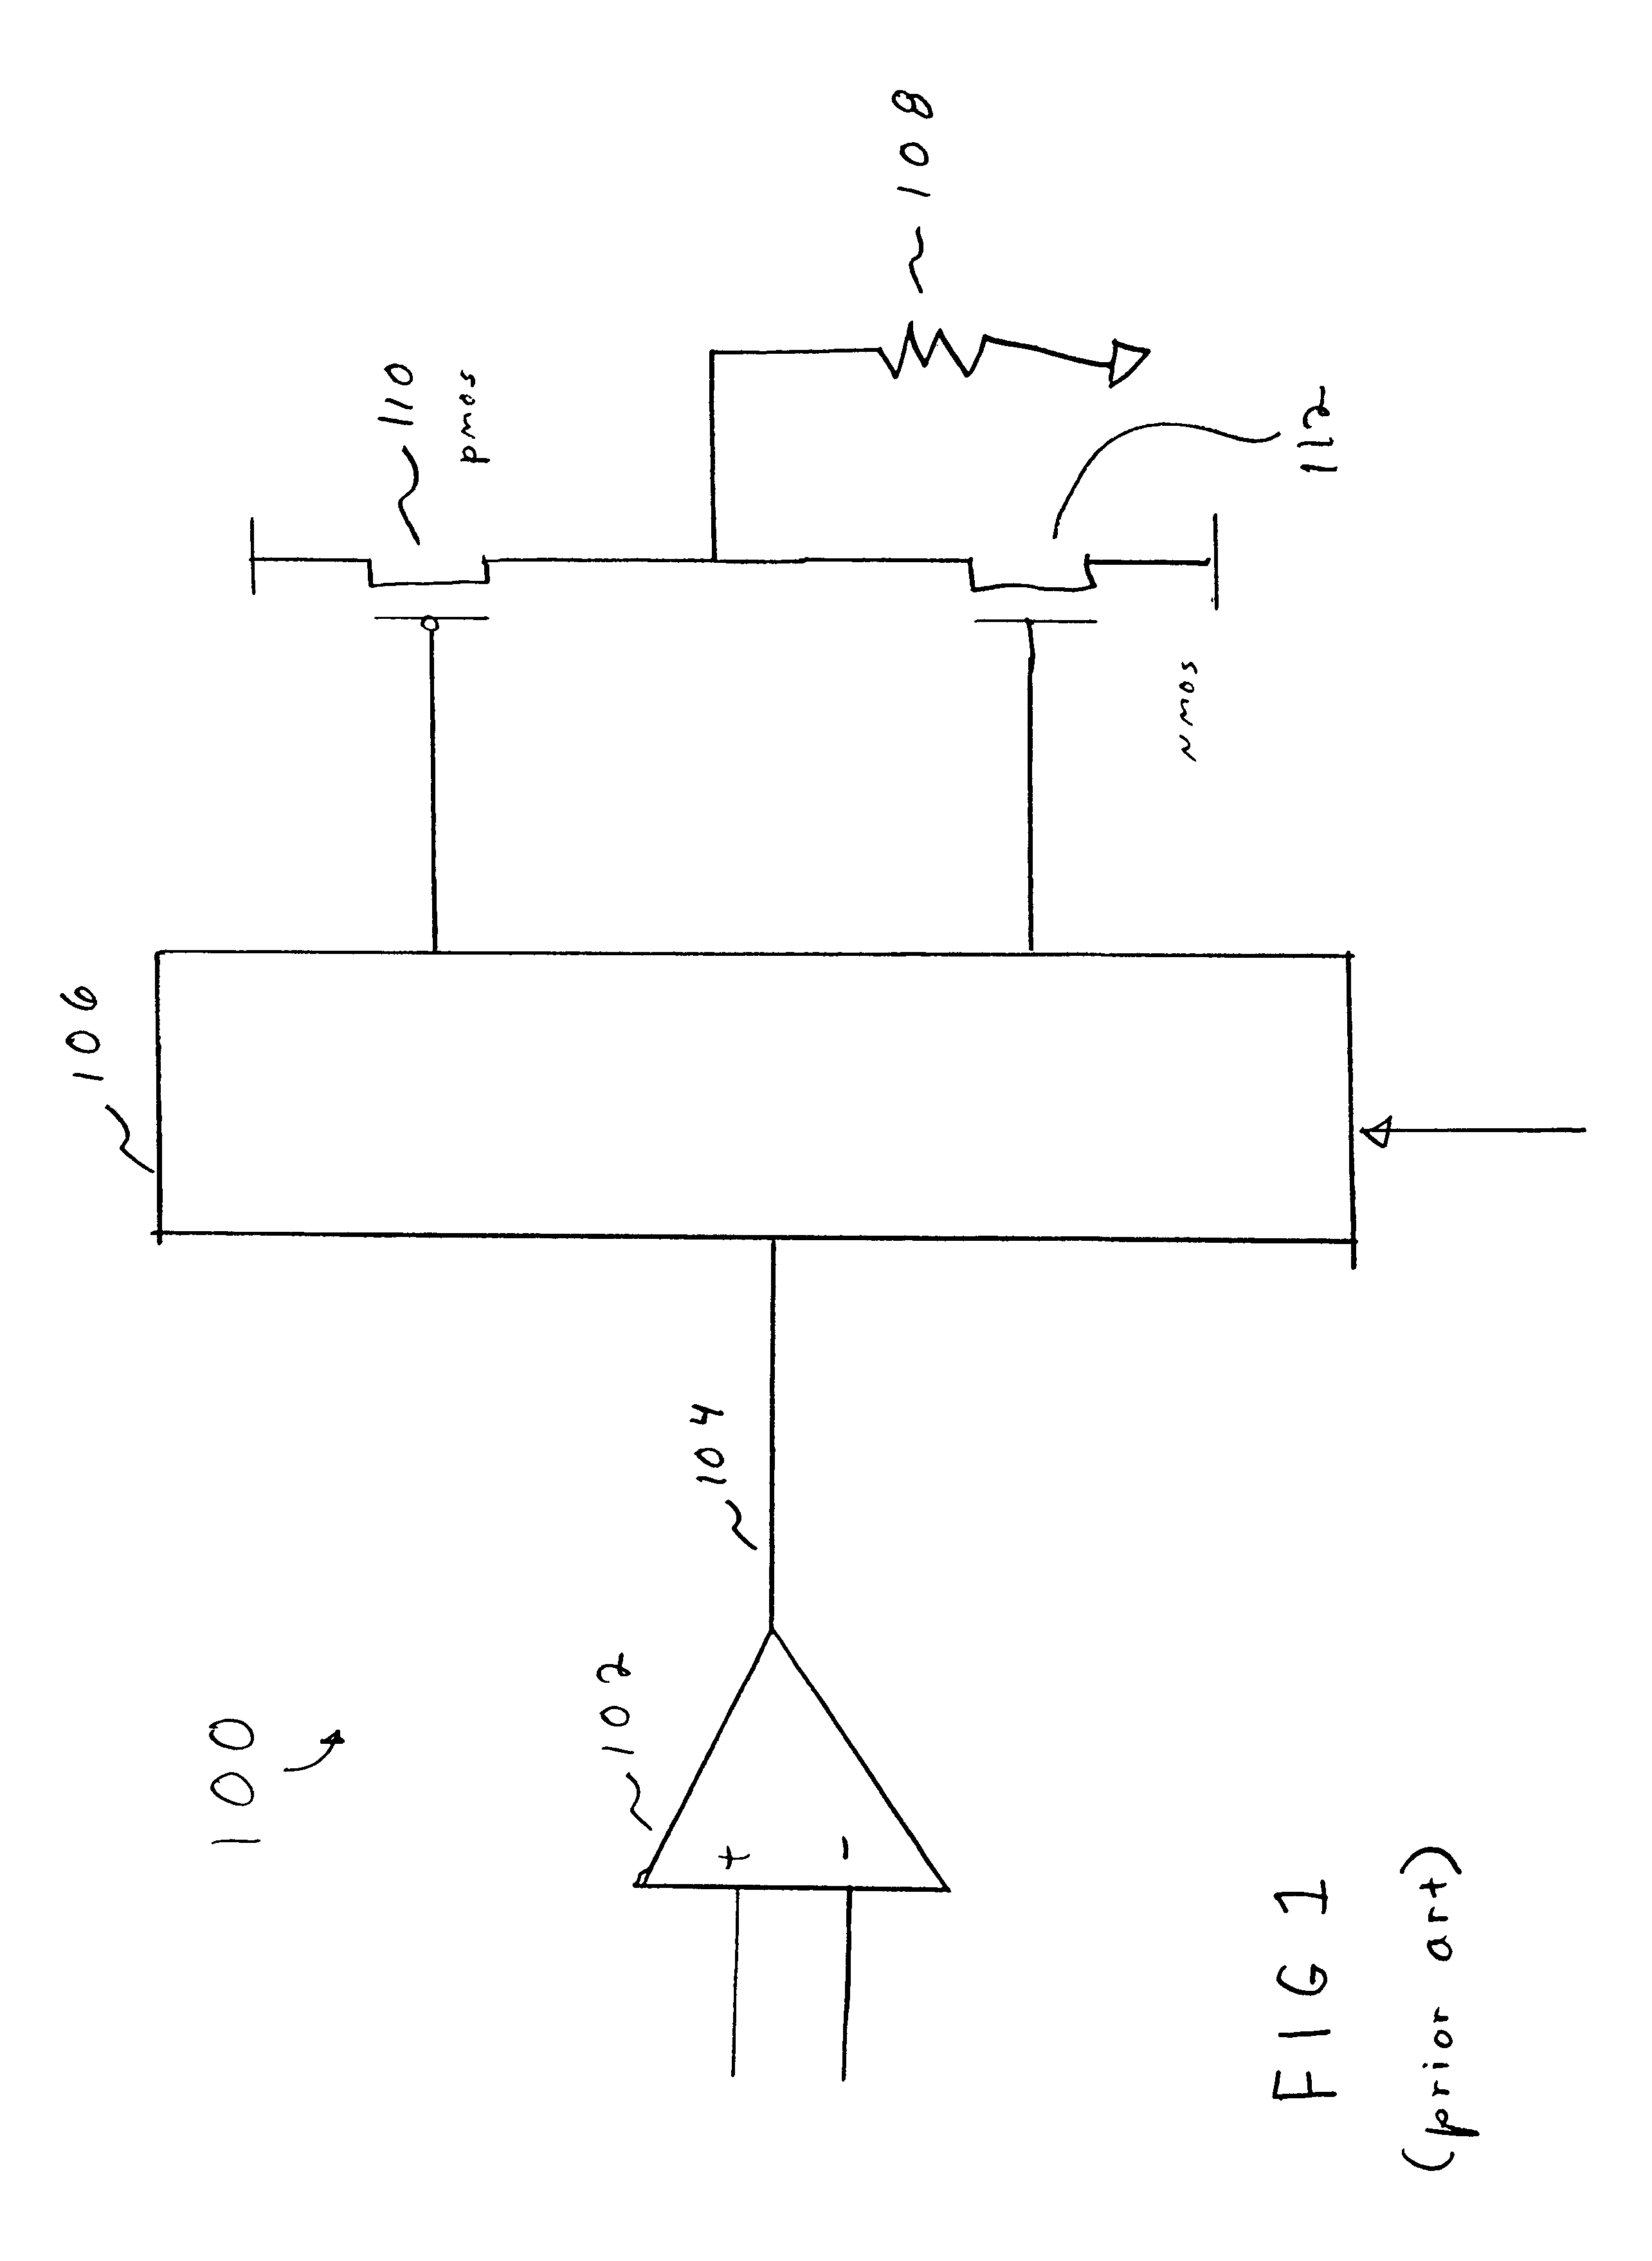 Apparatus and methods for improved control of quiescent state of output transistors in a class AB amplifier